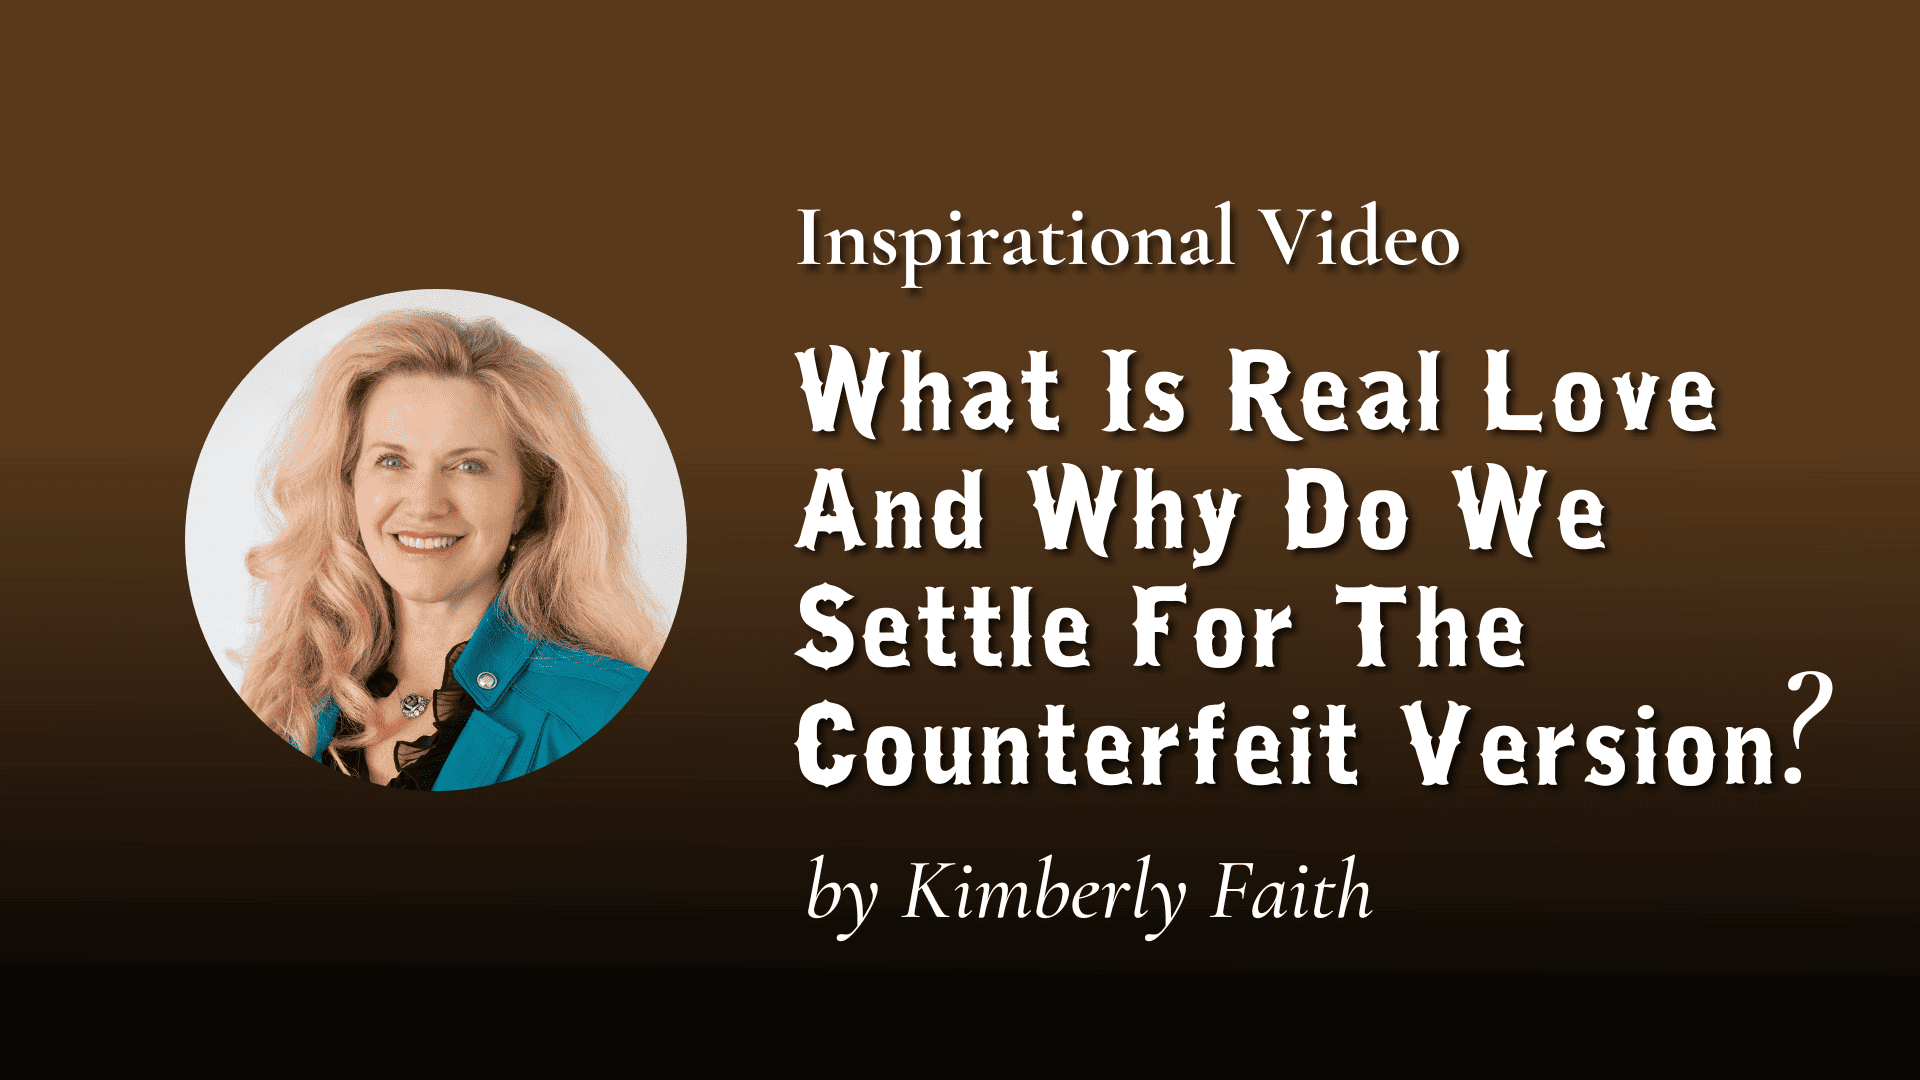 What Is Real Love And Why Do We Settle For The Counterfeit Version?